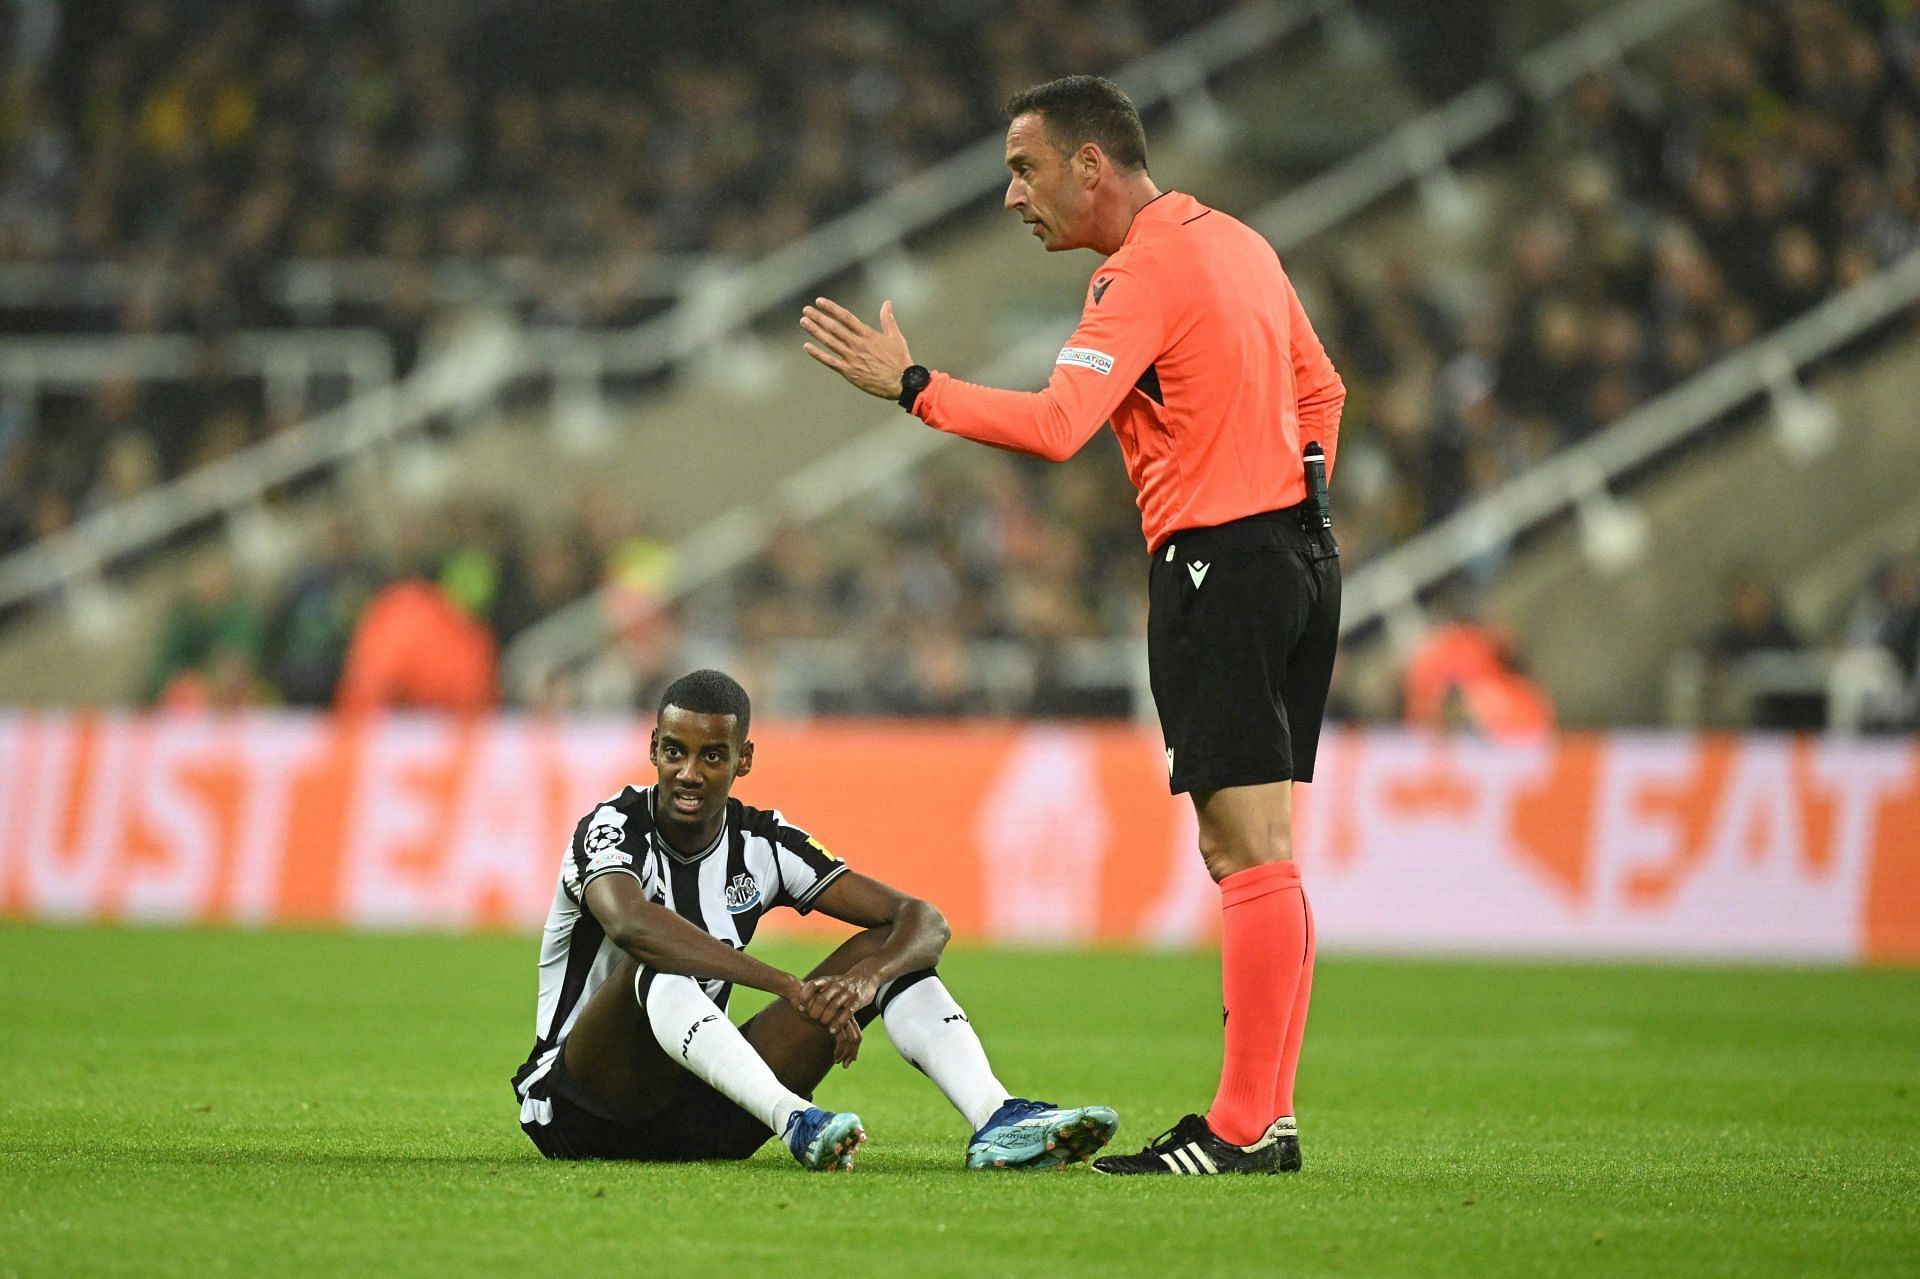 Newcastle United were beaten at home by Borussia Dortmund in the Champions League